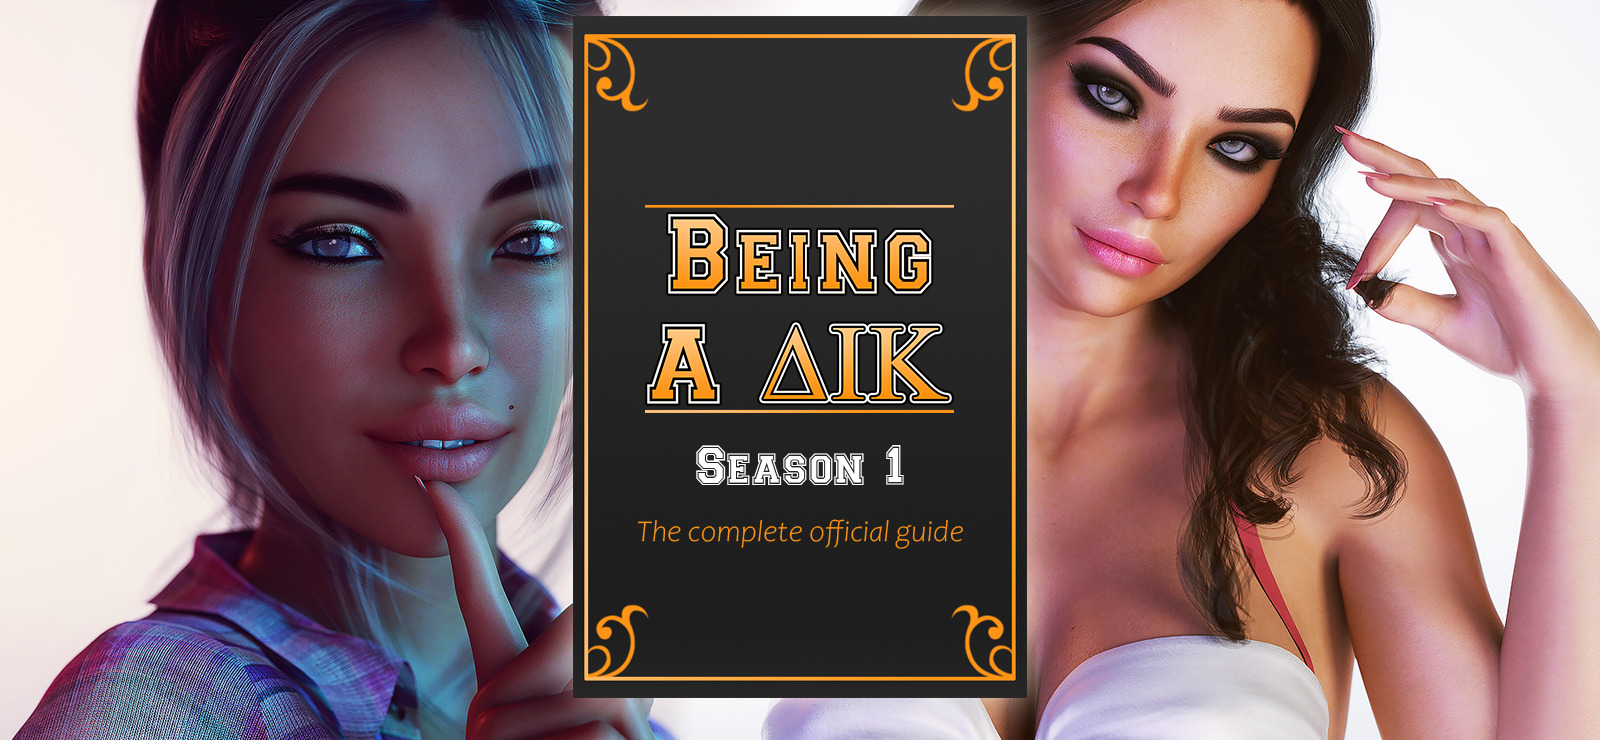 20% Being a DIK: Season 1 - The complete official guide on GOG.com